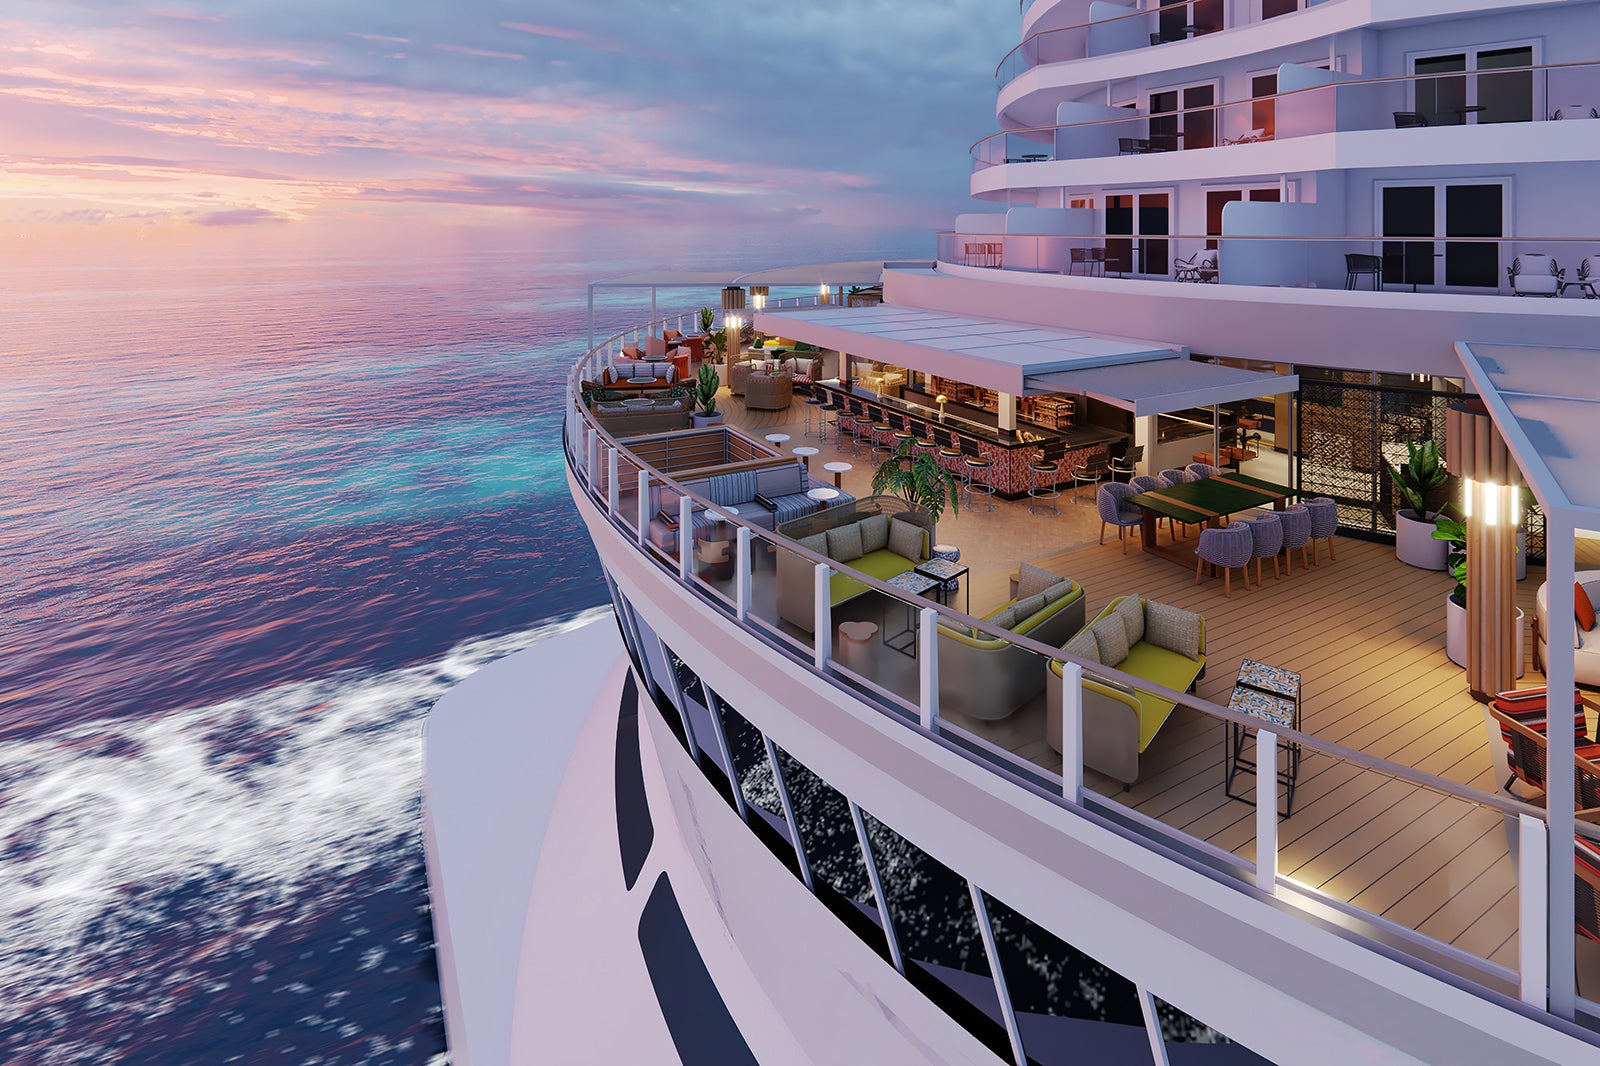 Aft deck seating area of Norwegian Prima cruise ship at dusk